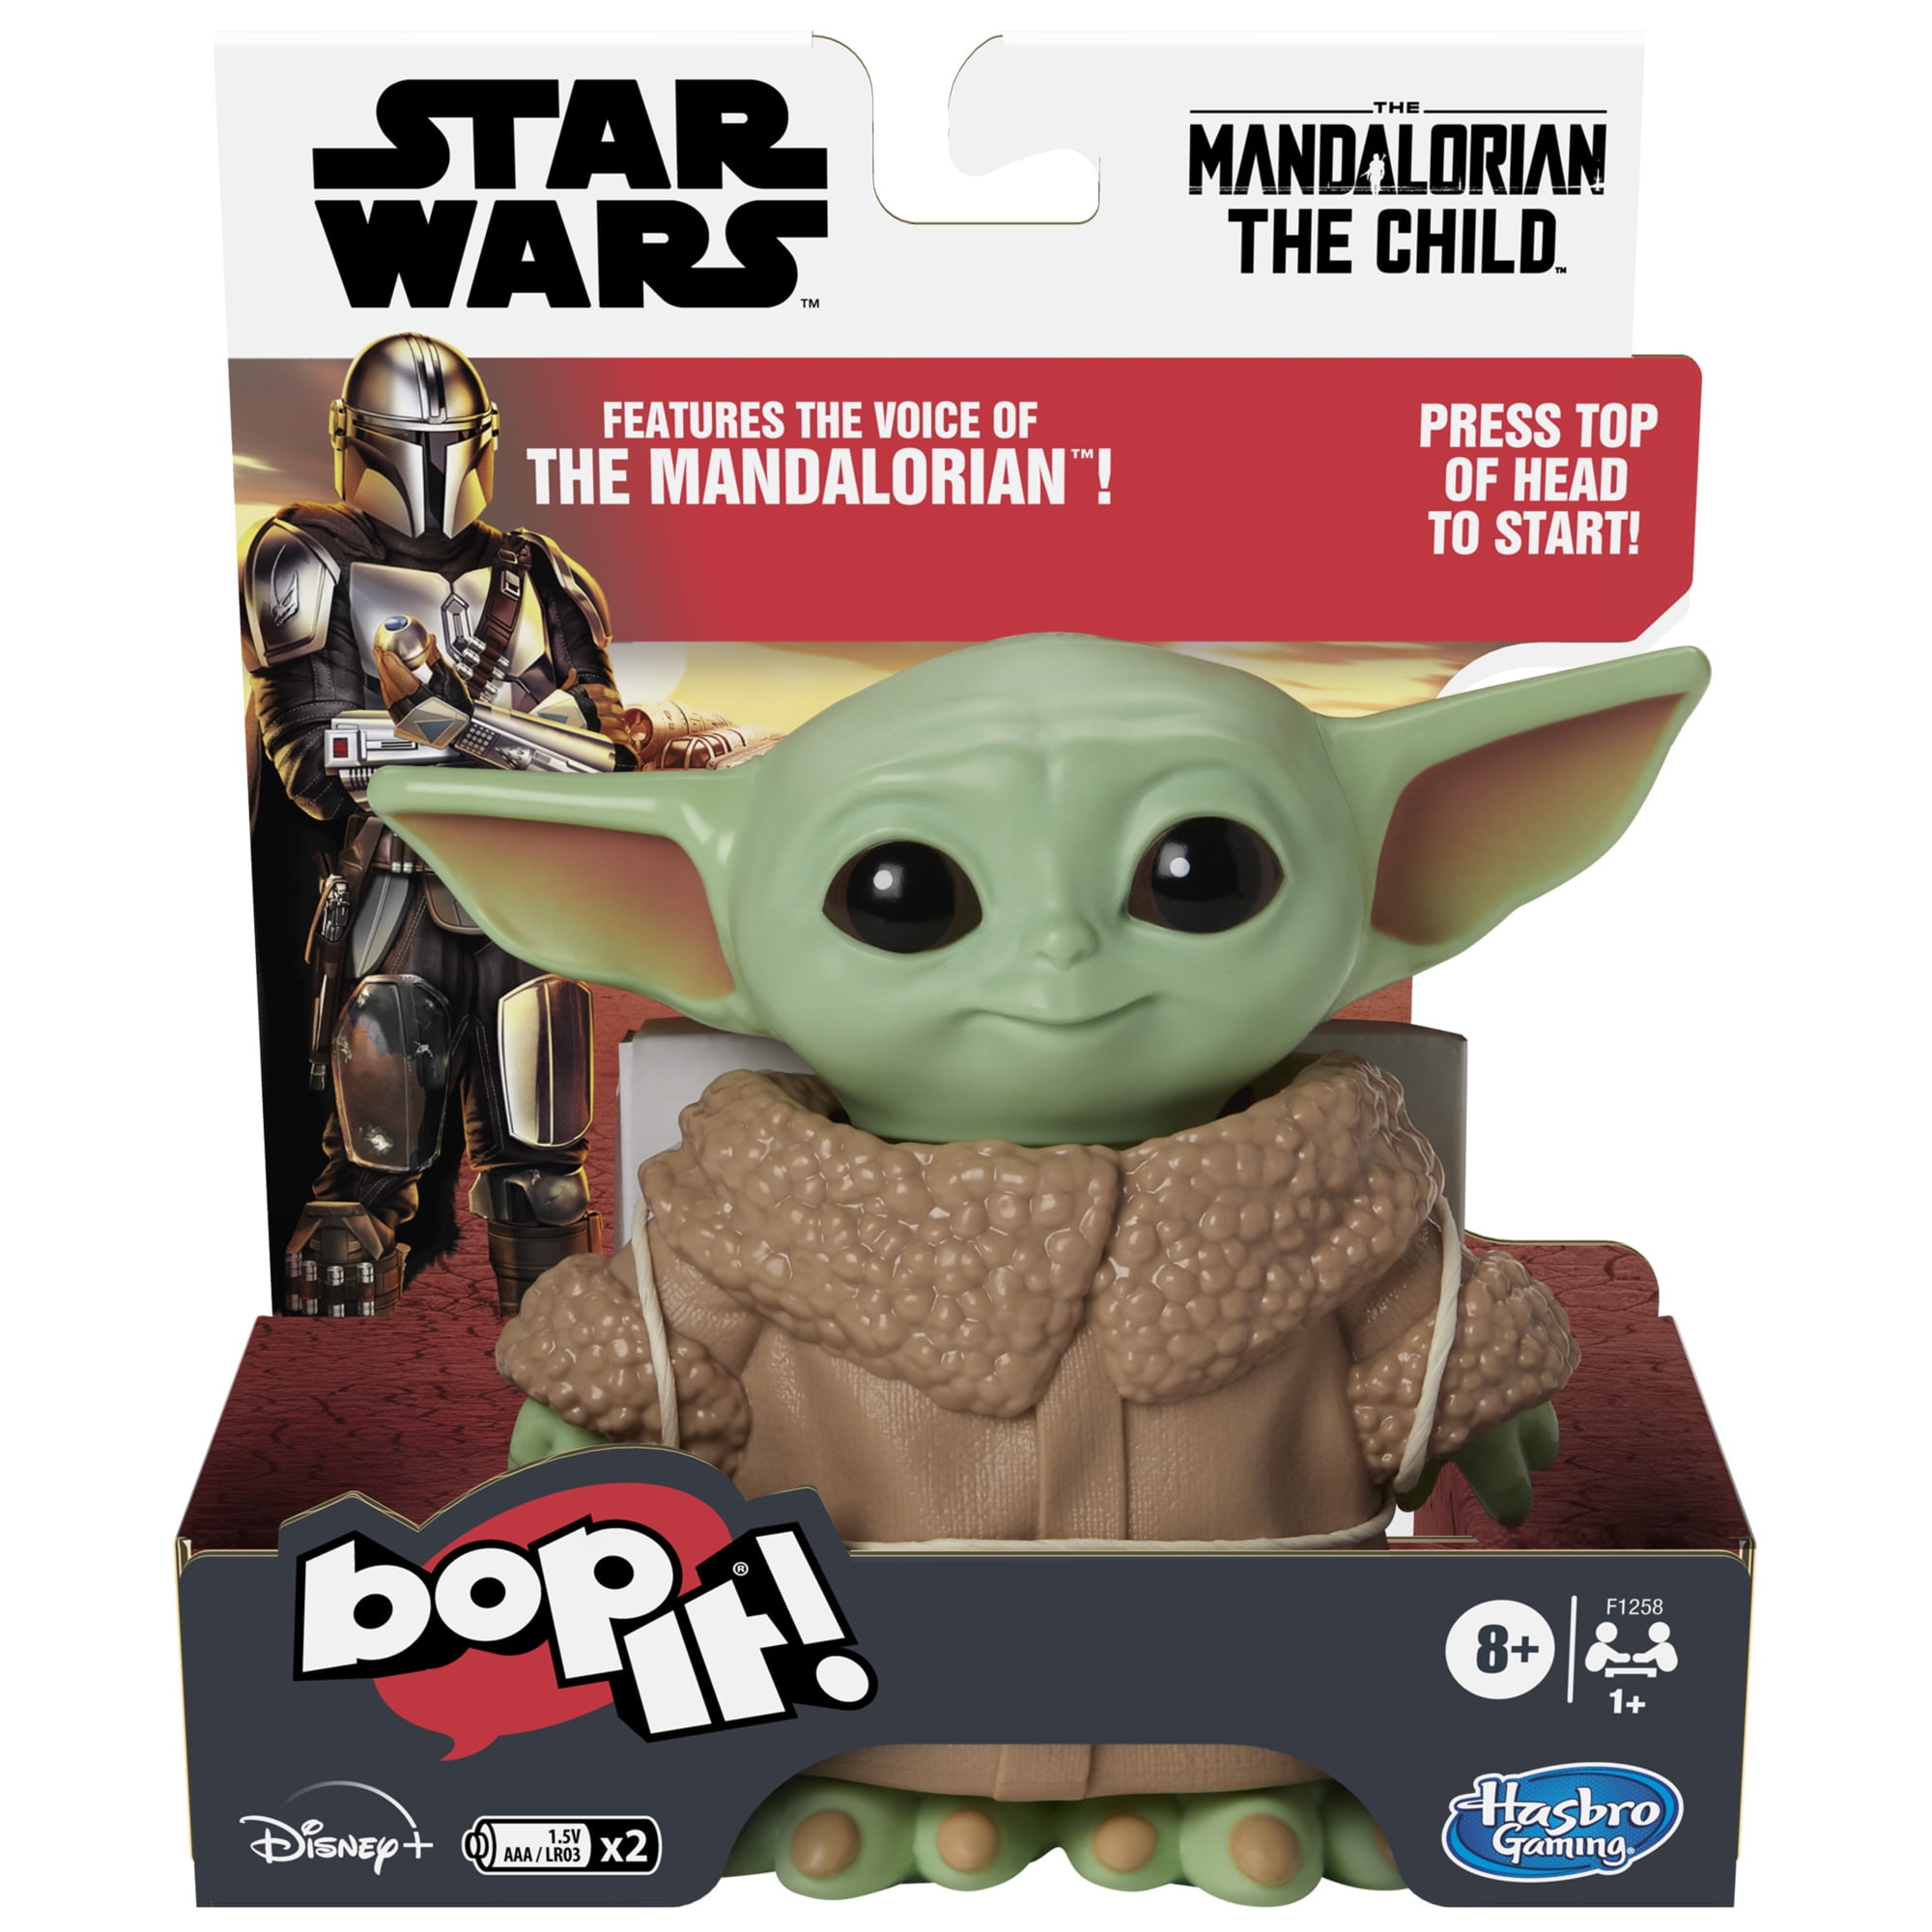 Bop It! Electronic Game for Kids Star Wars: The Mandalorian Edition, by Hasbro